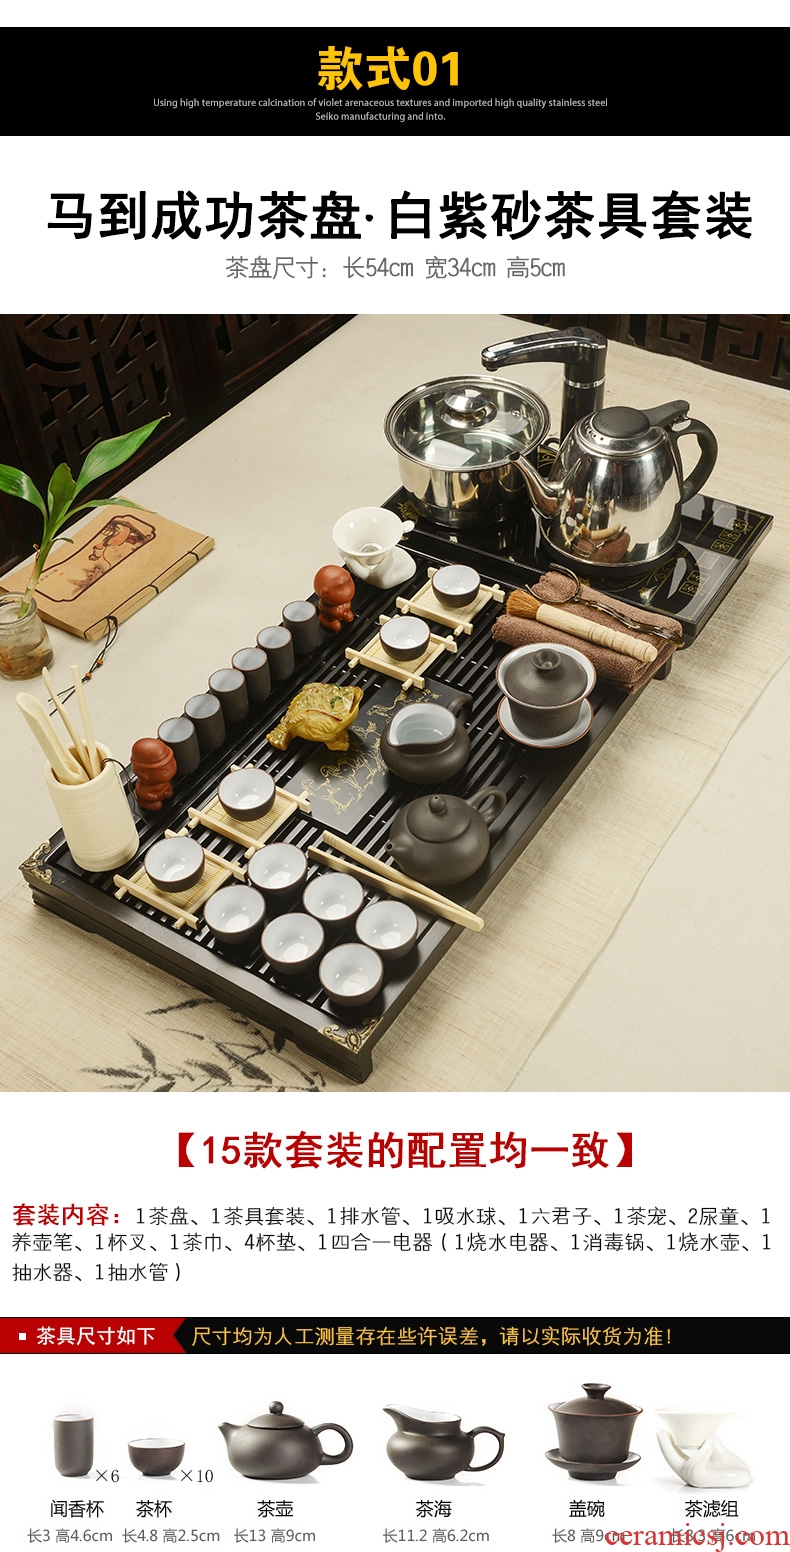 Beauty cabinet ceramic contracted household kung fu tea set a complete set of tea sets tea tray tea solid wood tea tray was violet arenaceous the teapot